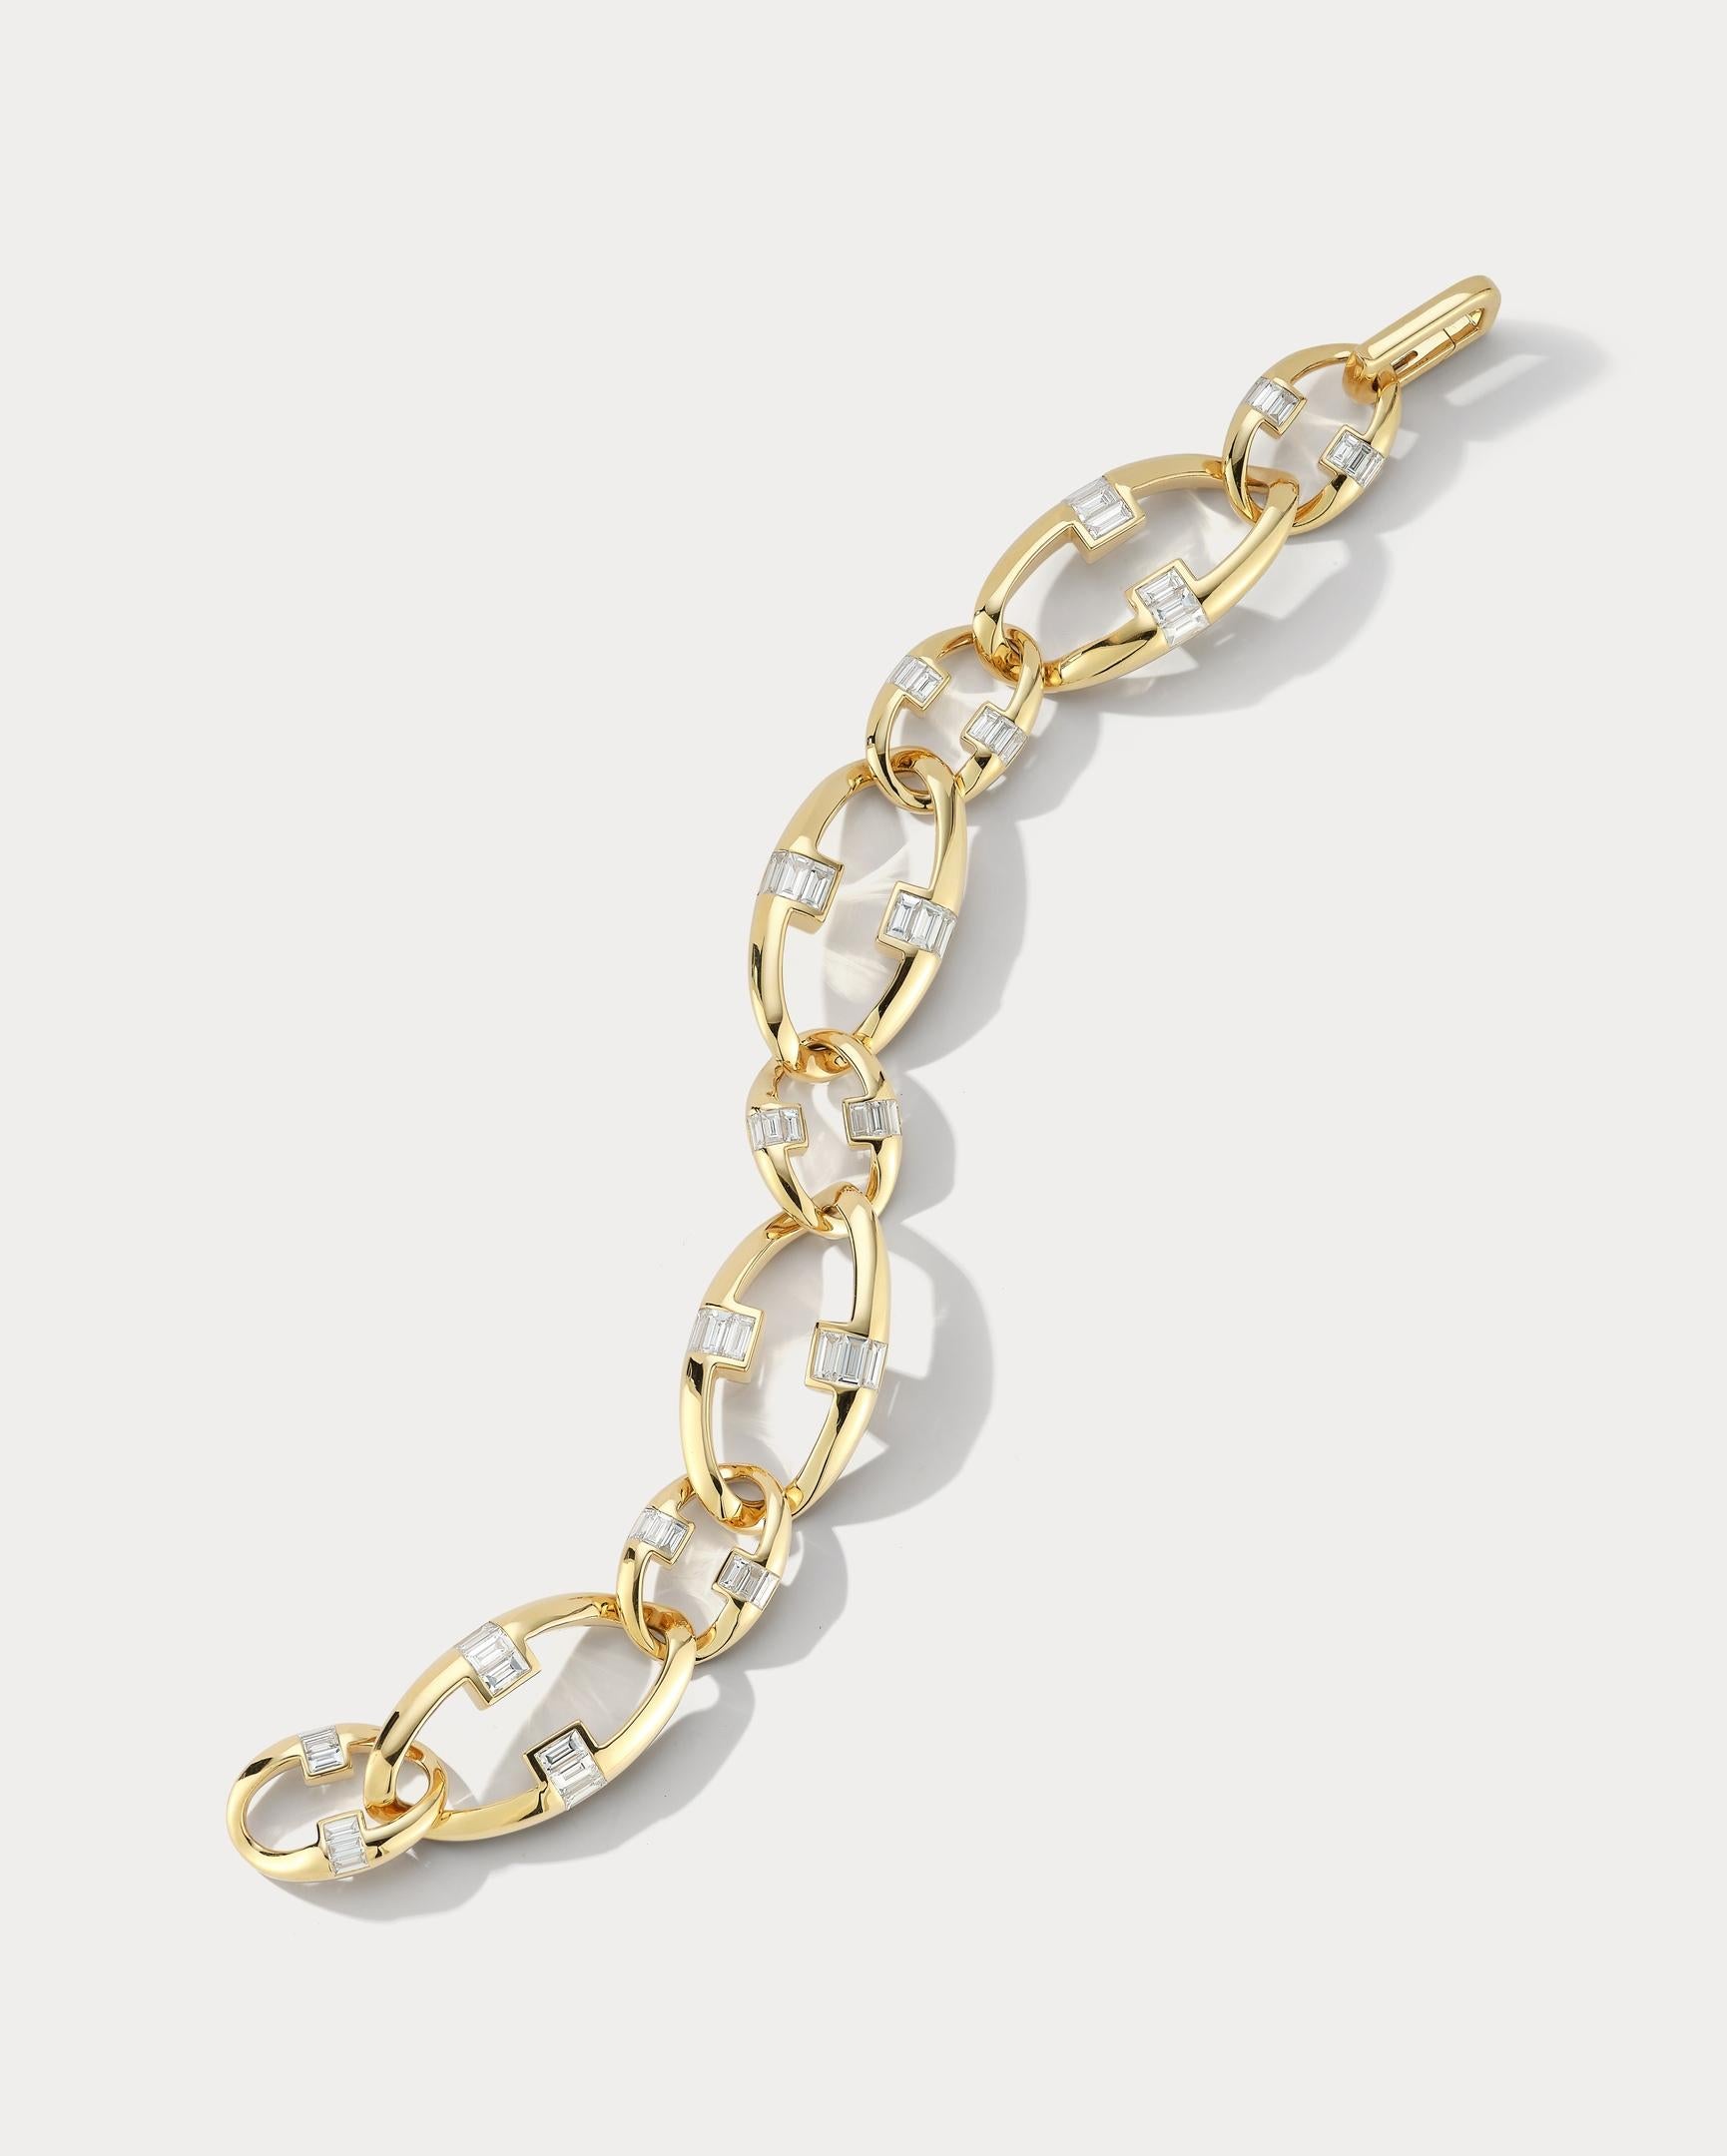 Elevate your style with this stunning 18k link bracelet, set with glittering baguette diamonds totaling 3.97 carats. The diamonds are expertly set in the links, creating a brilliant and eye-catching sparkle with every movement. The signature lock